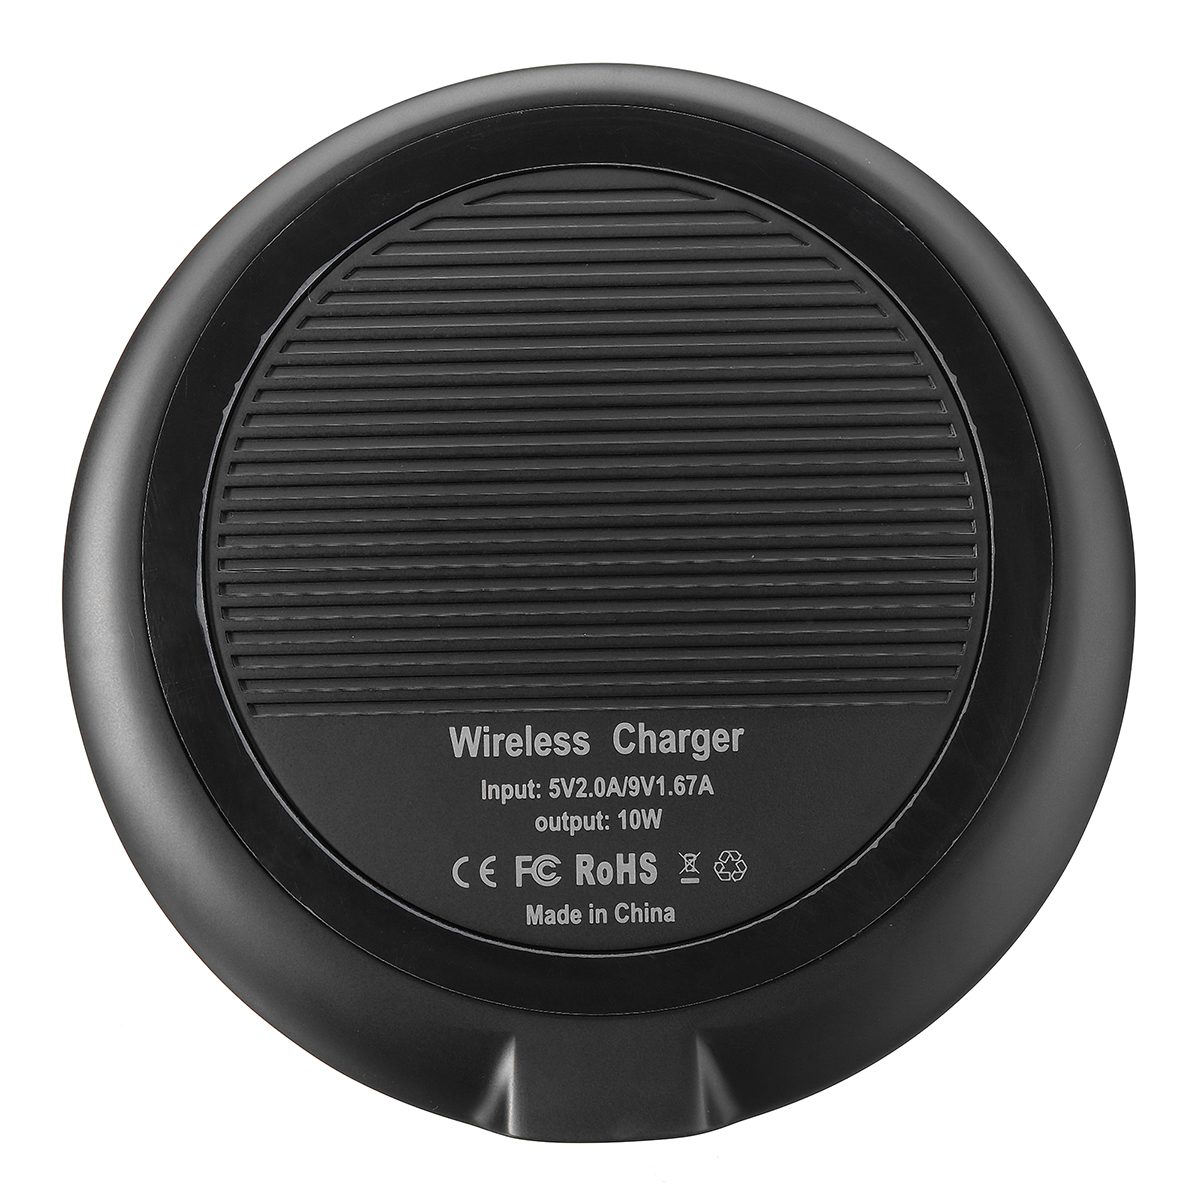 10W-Qi-Standard-9V-Fast-Wireless-Desktop-Charger-Pad-for-iPhone-X-8-Plus-Galaxy-S8-S9-Note-8-1263428